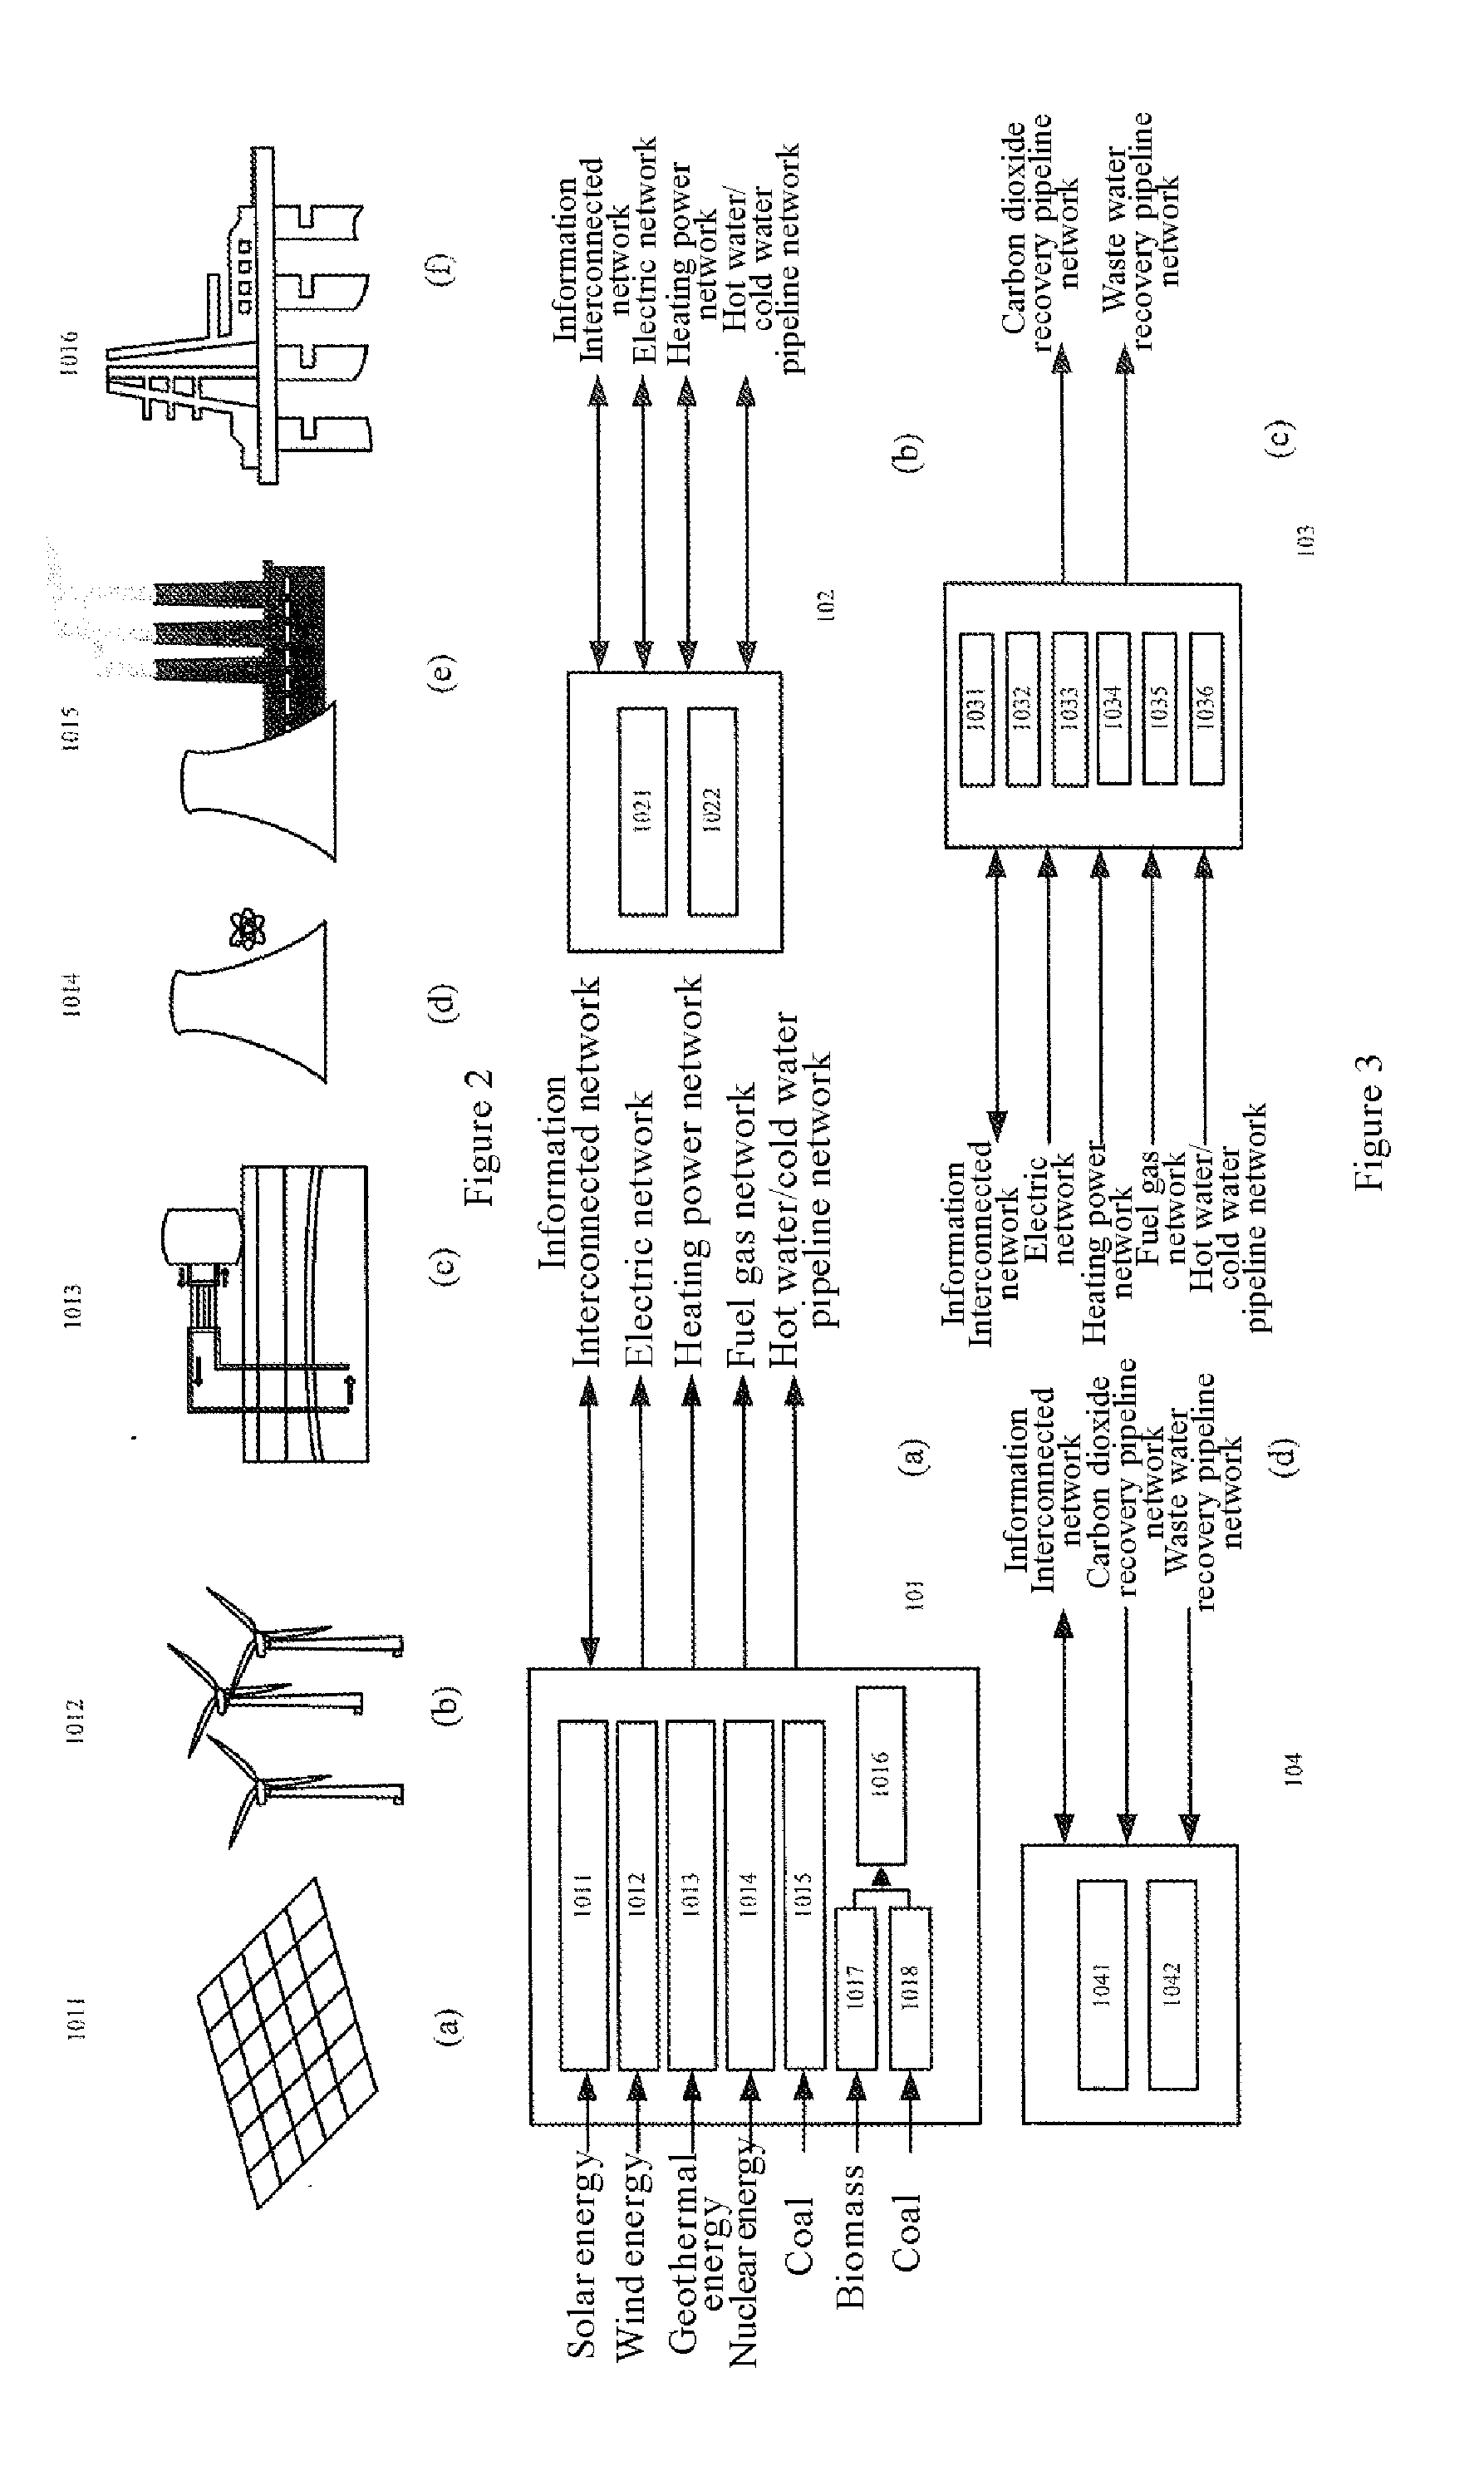 System energy efficiency controller, energy efficiency gain device and smart energy service system used for energy utilization